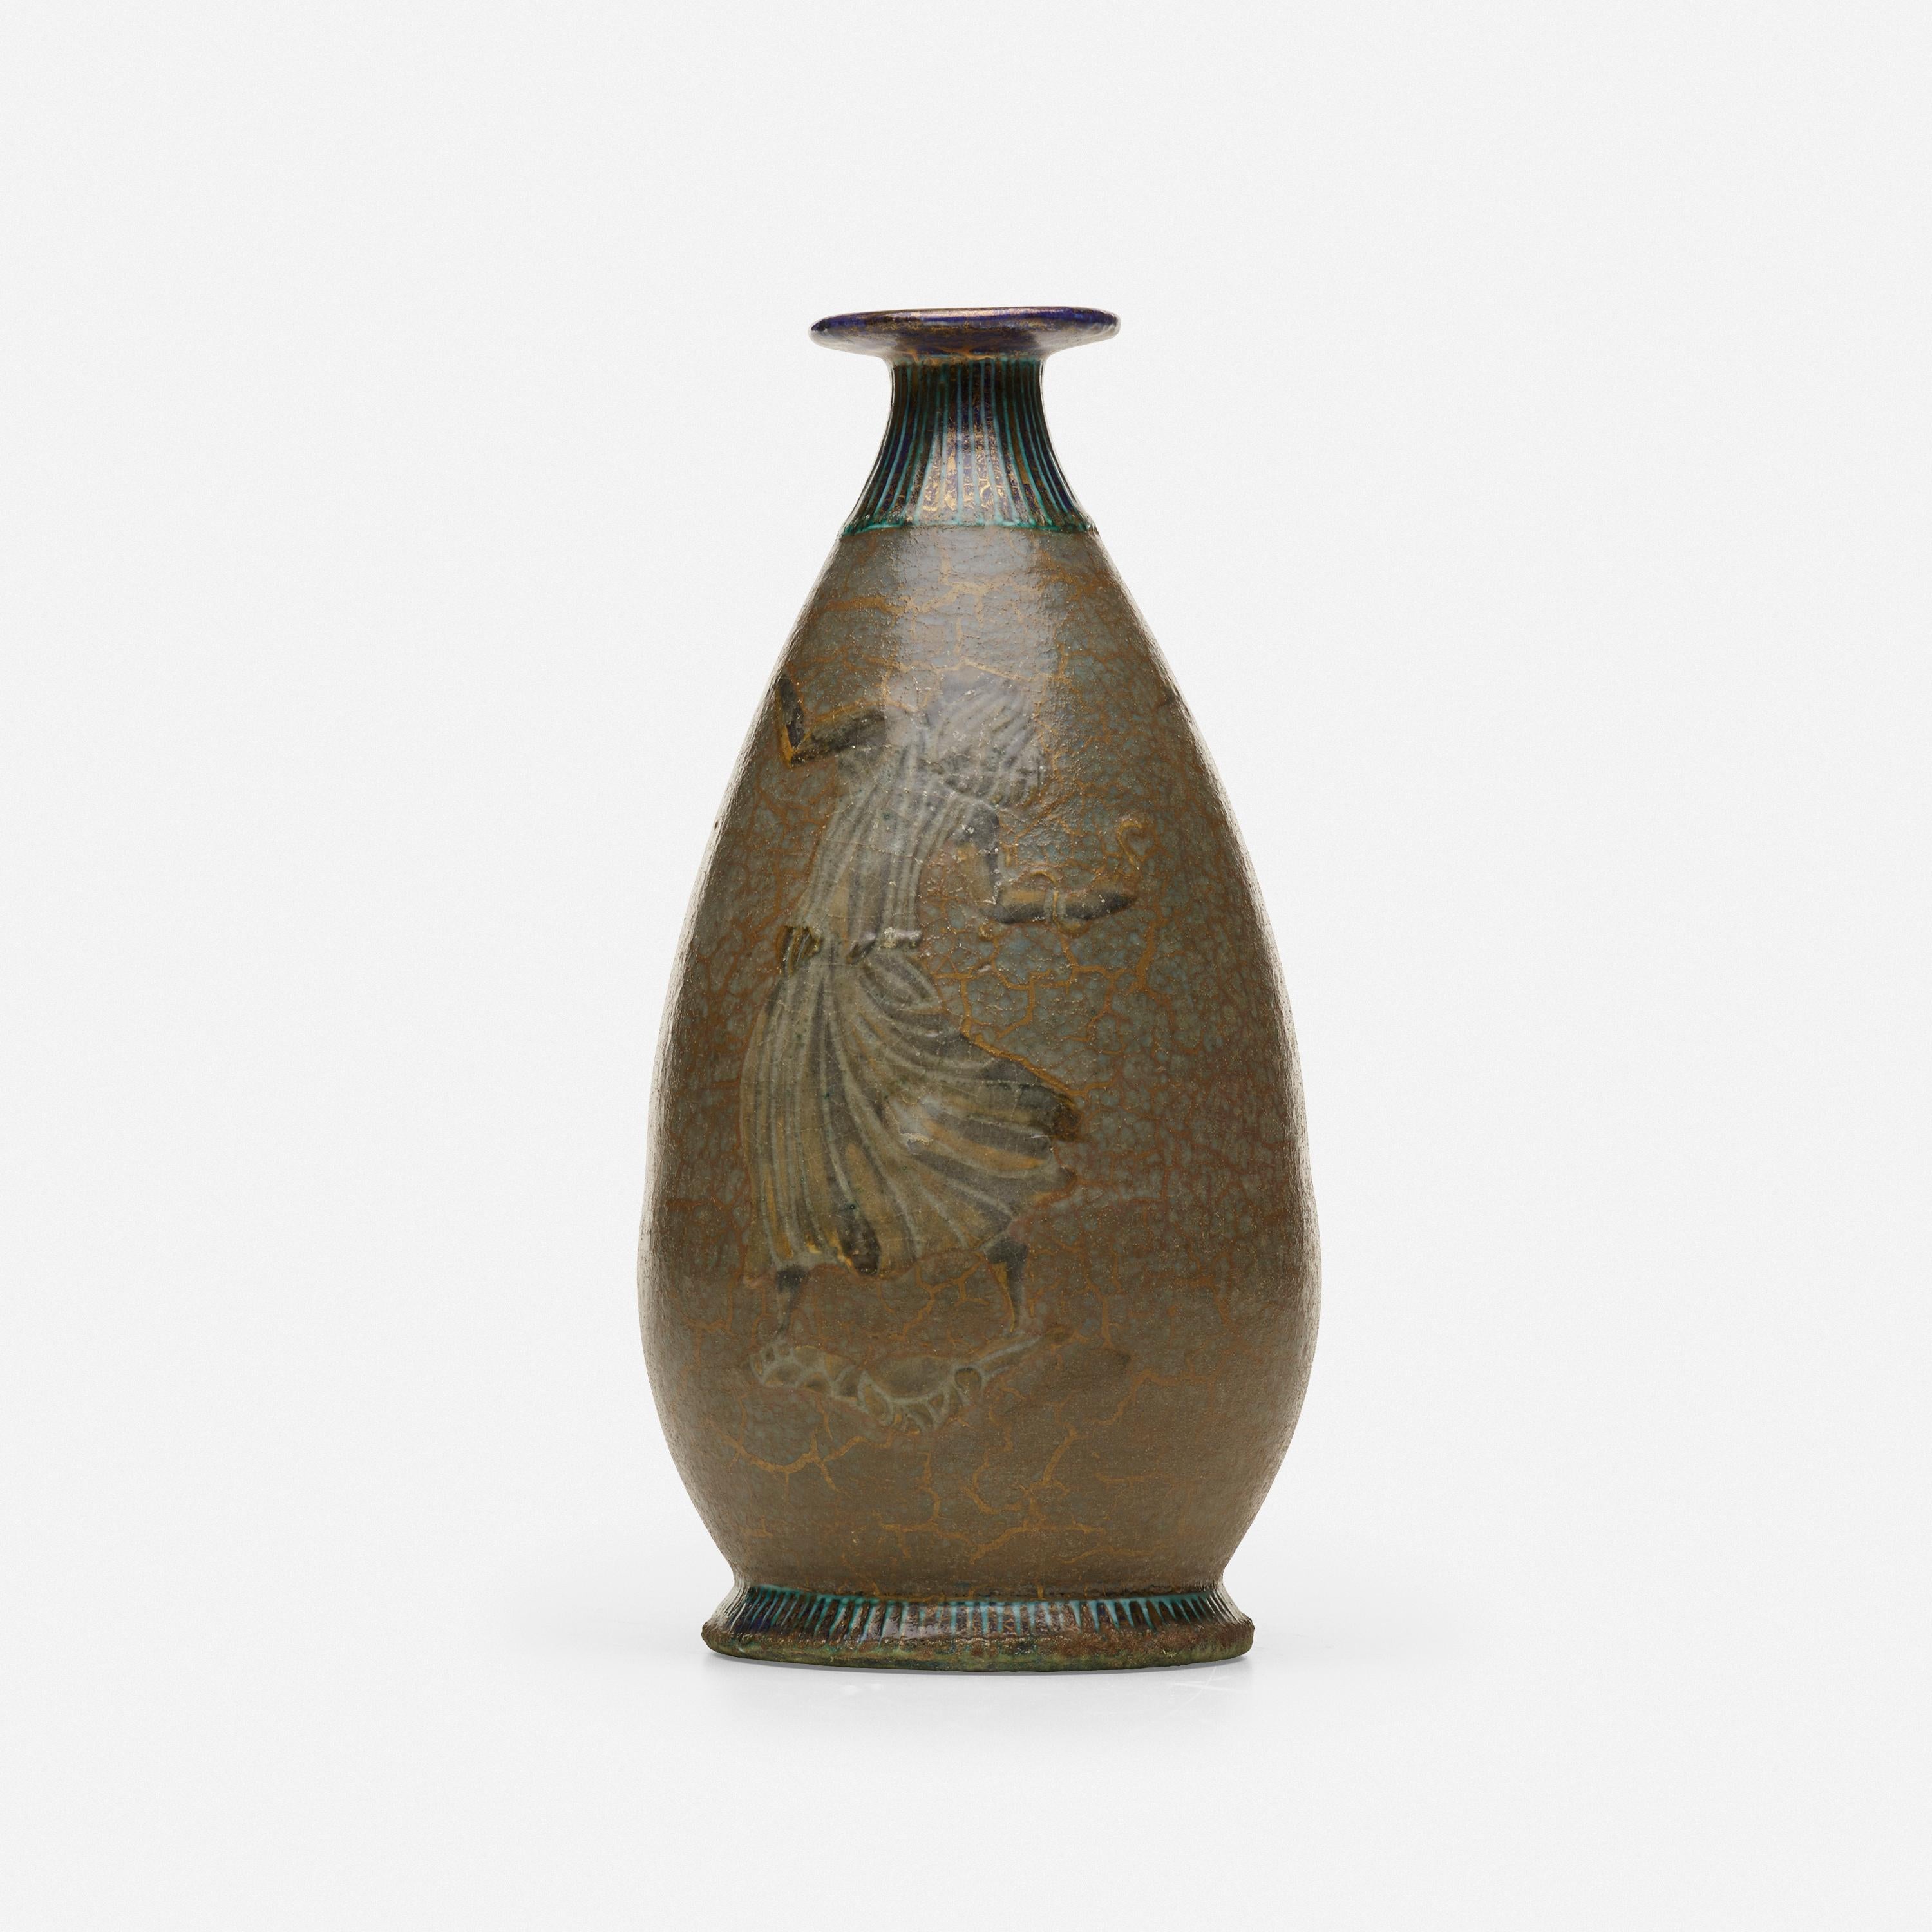 Ceramic vase by Jean Mayodon the brown glazed finish showing a representation of Bacchante. Artist's cipher to underside. Provenance: Seymour Stein Collection.